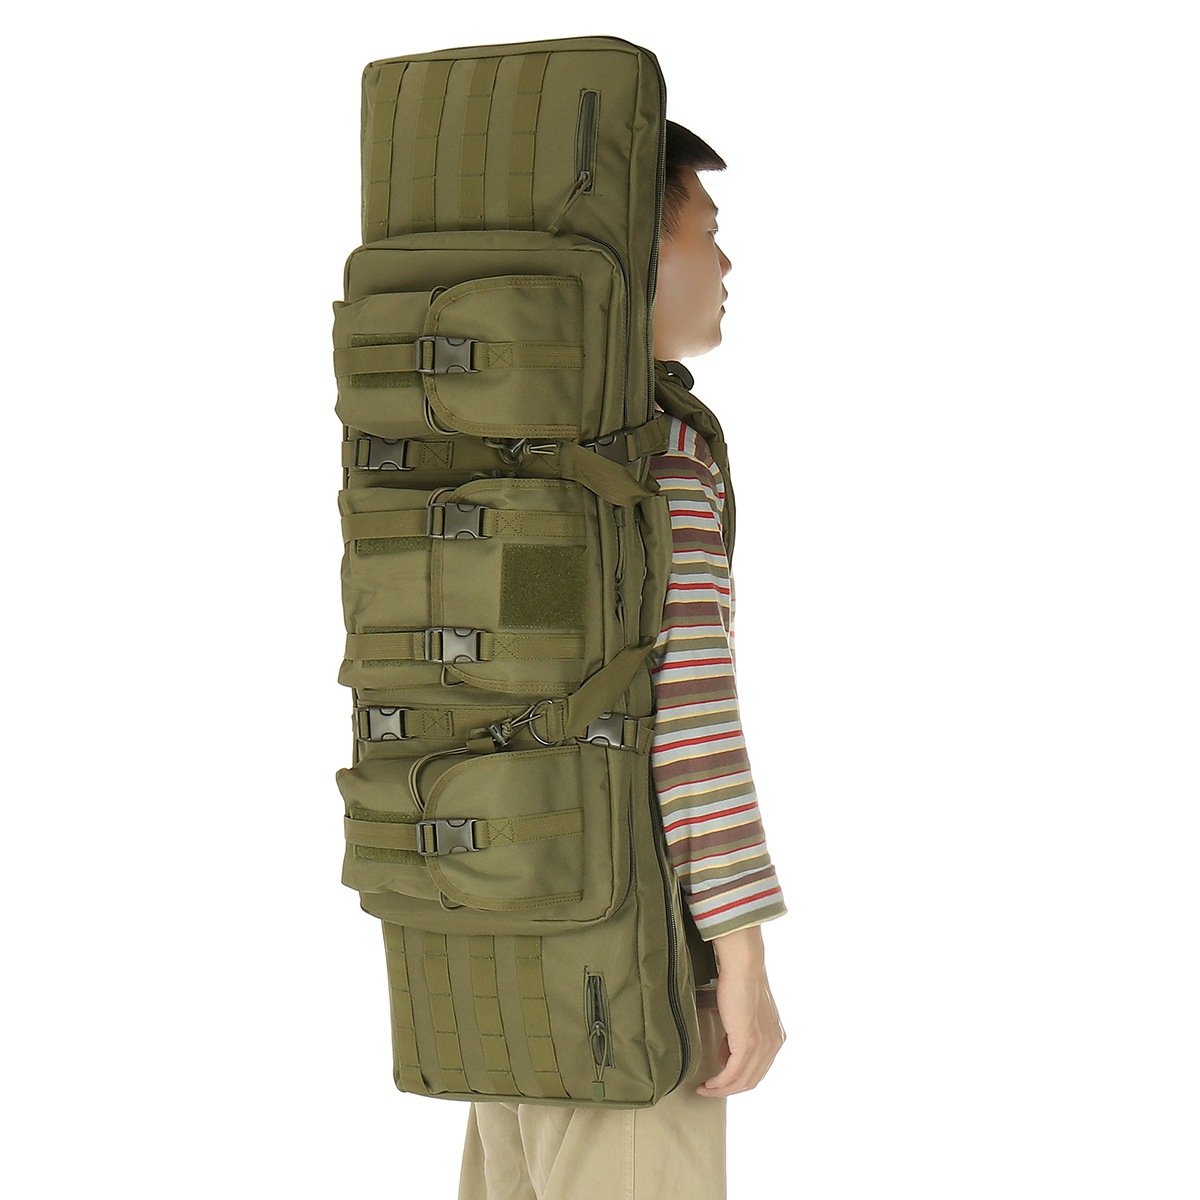 42-inch-Multifunctional-600D-Oxford-Cloth-Outdoor-Tactical-Storage-Bag-Double-Padded-Backpack-1854880-10